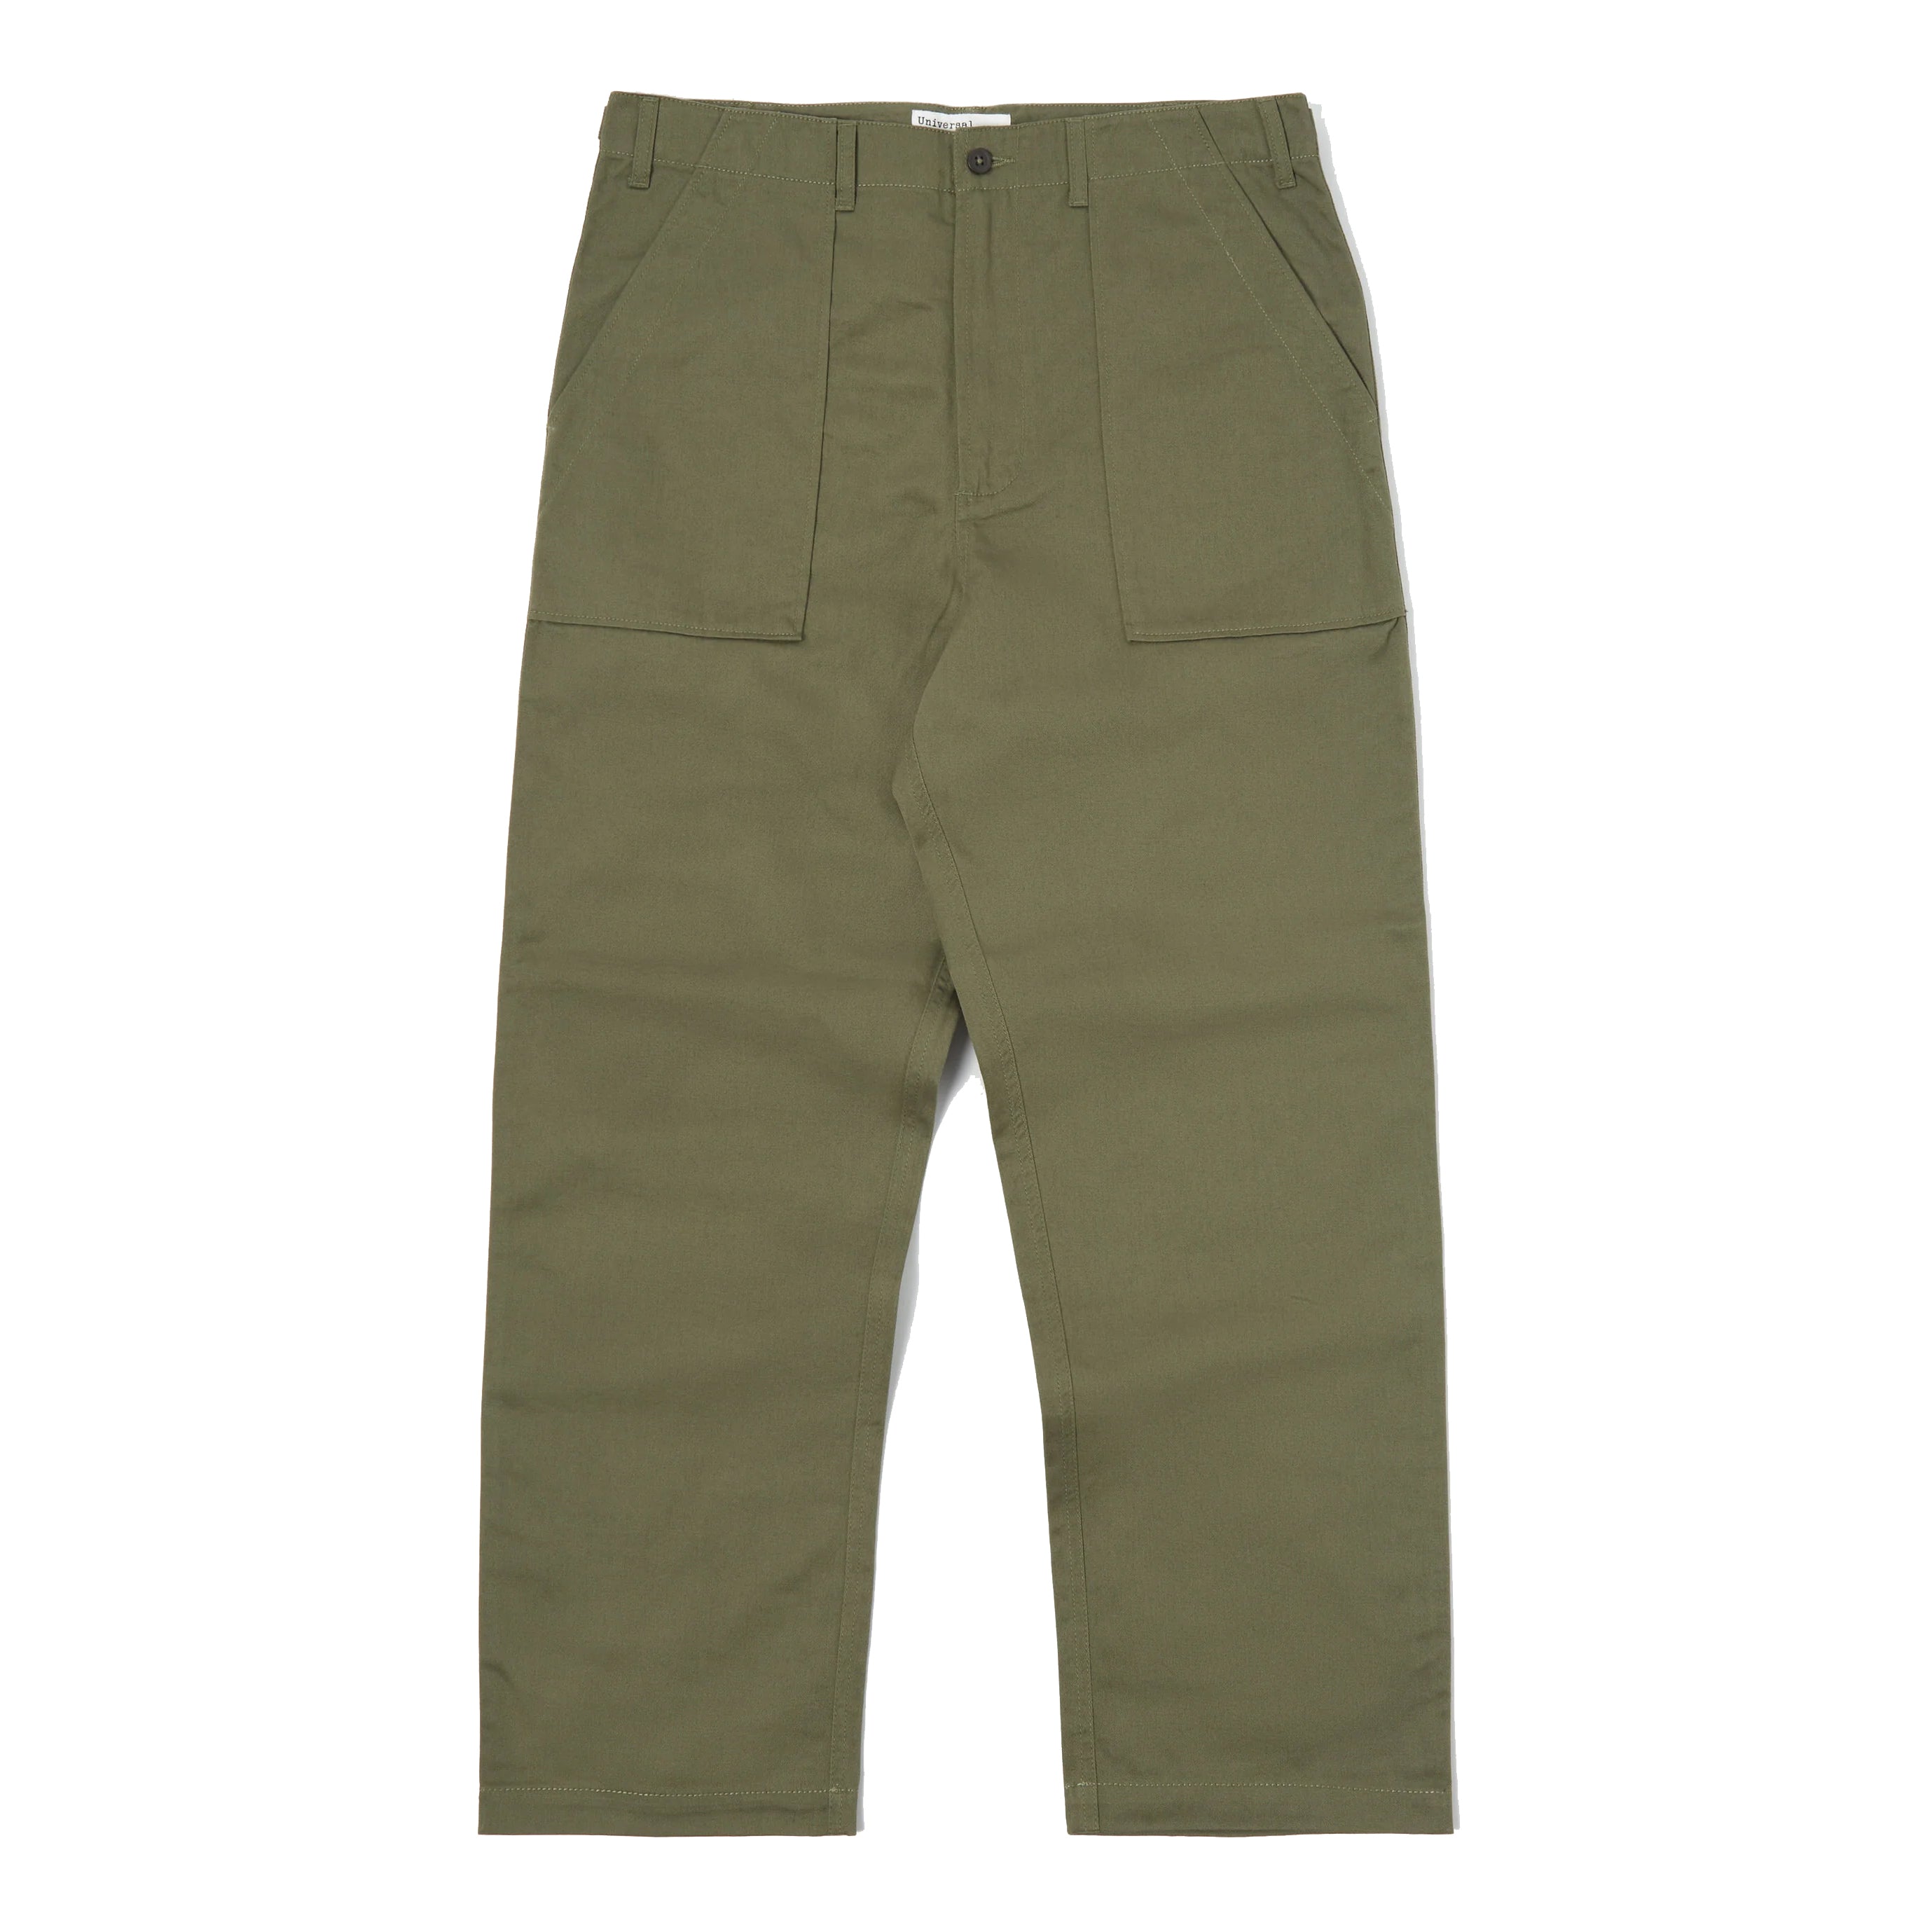 Fatigue Pant - Light Olive Twill